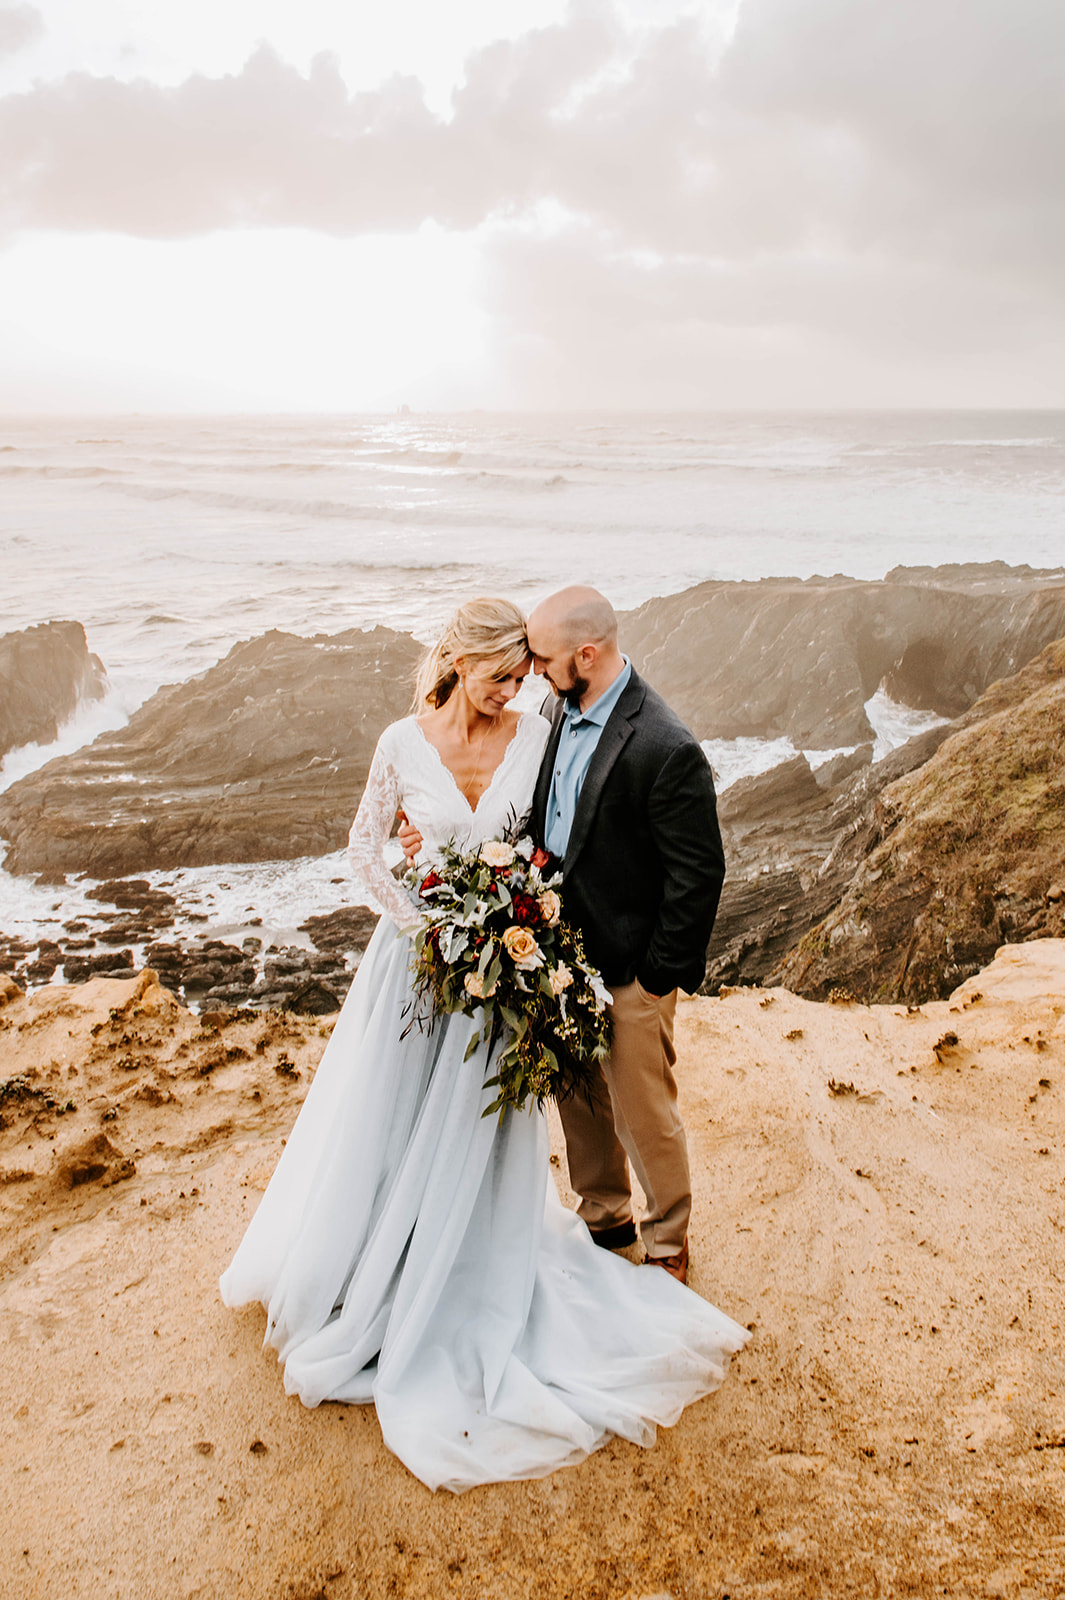 A bride and groom standing forehead to forehead on the cliffs at Otter Point on the Oregon Coast.